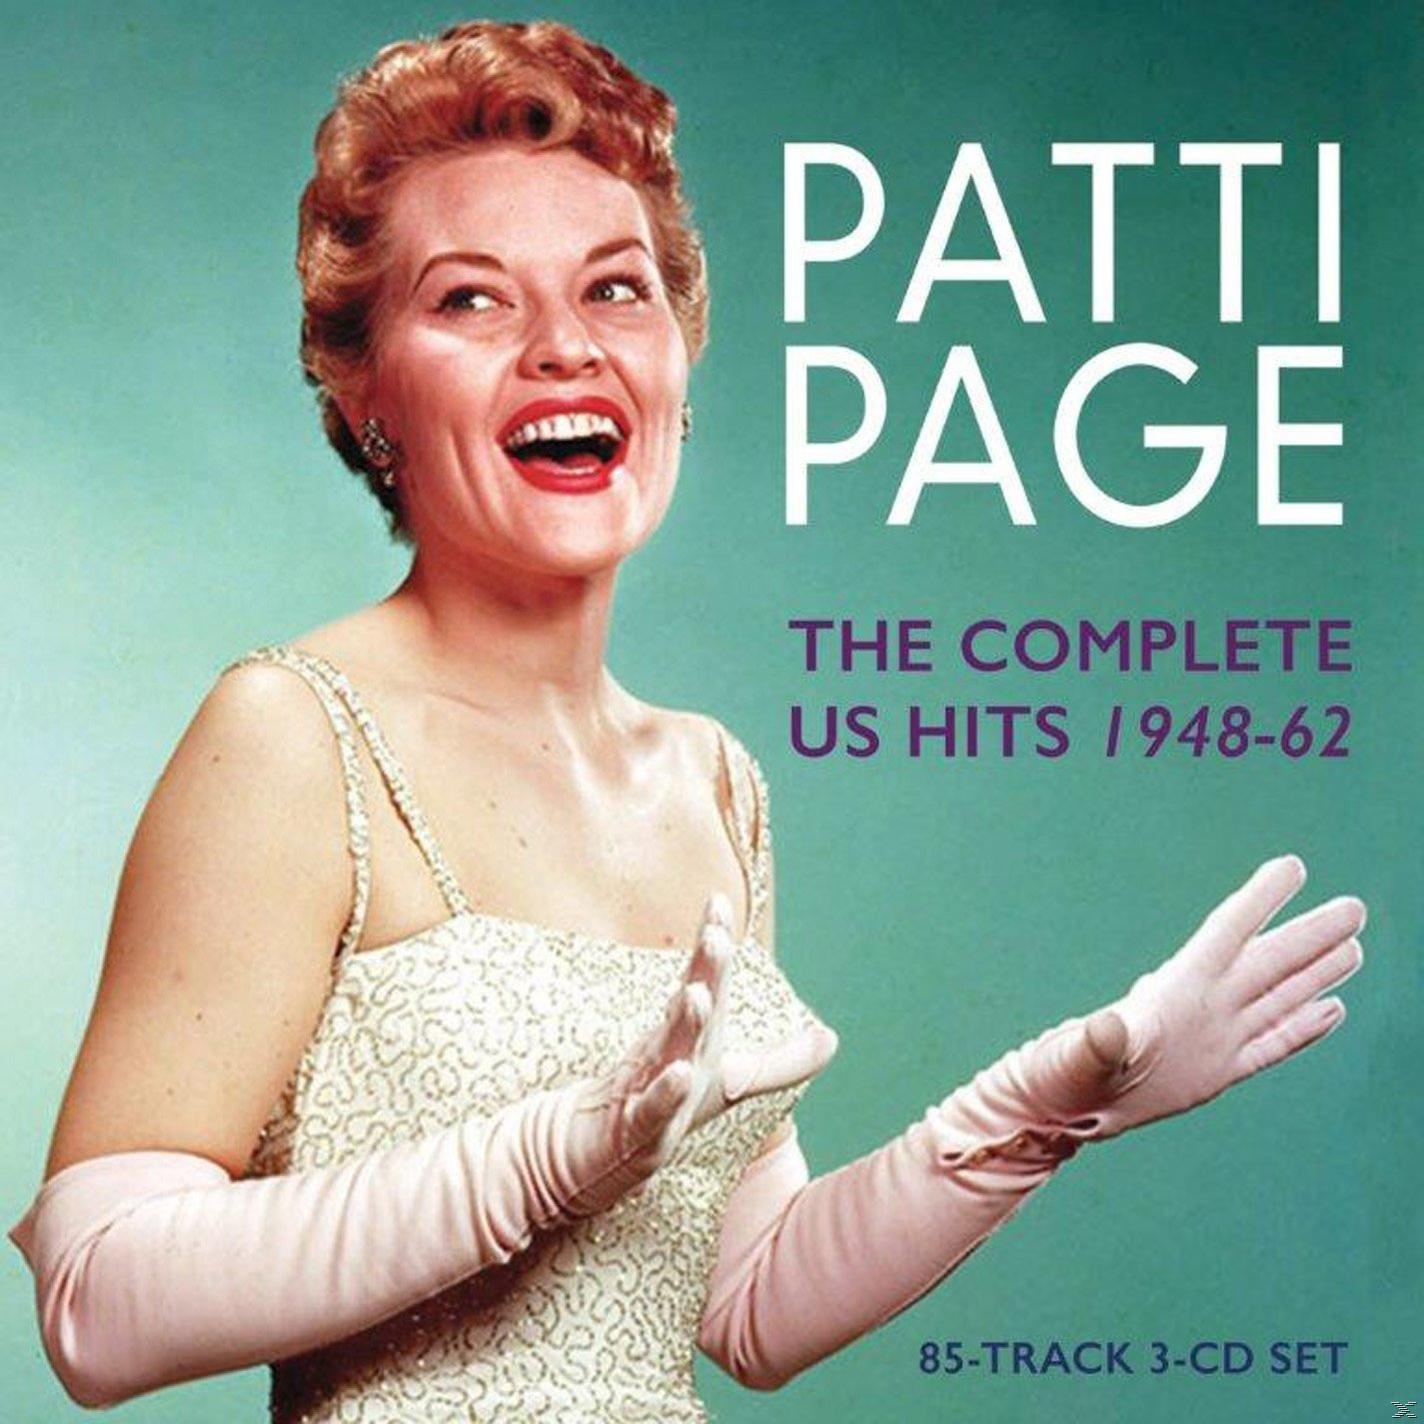 The Page 1948-62 Hits (CD) - Us Patti Complete -